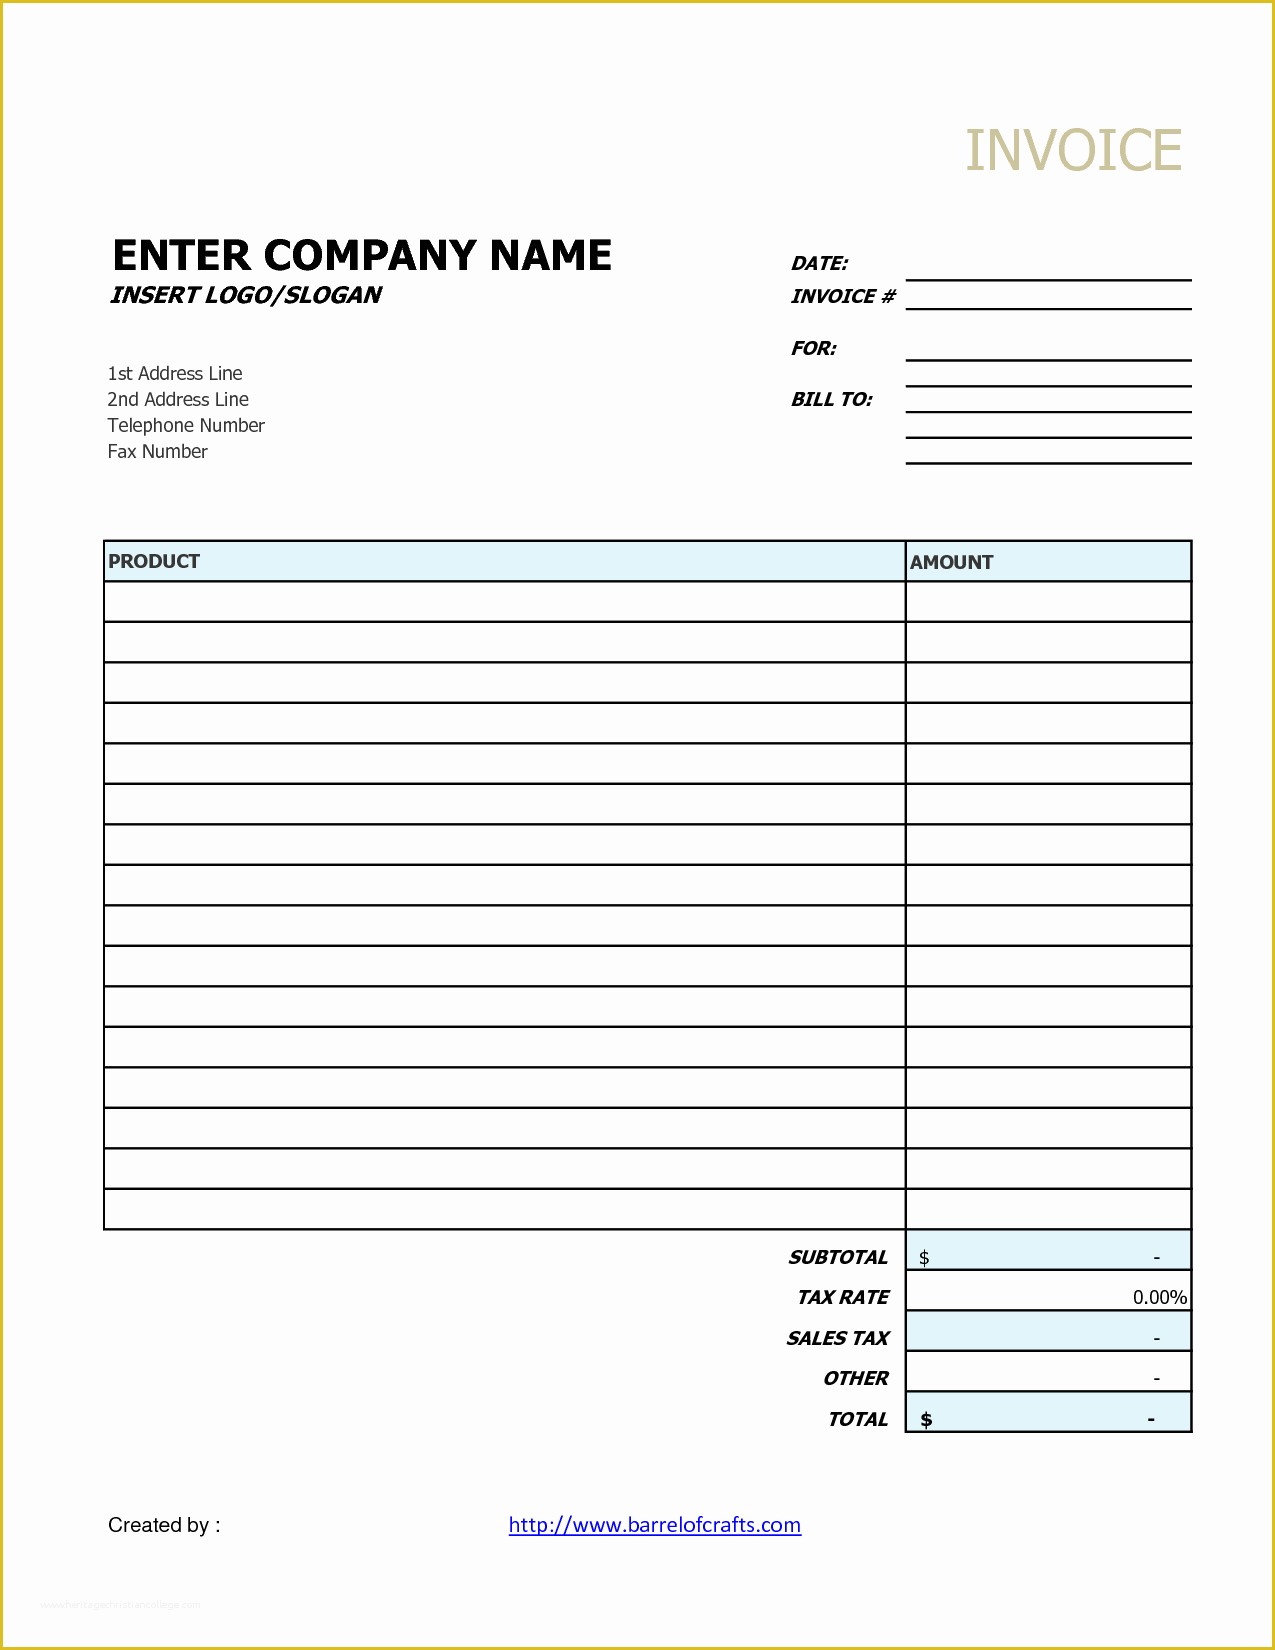 Billing Invoice Template Free Of Generic Invoice